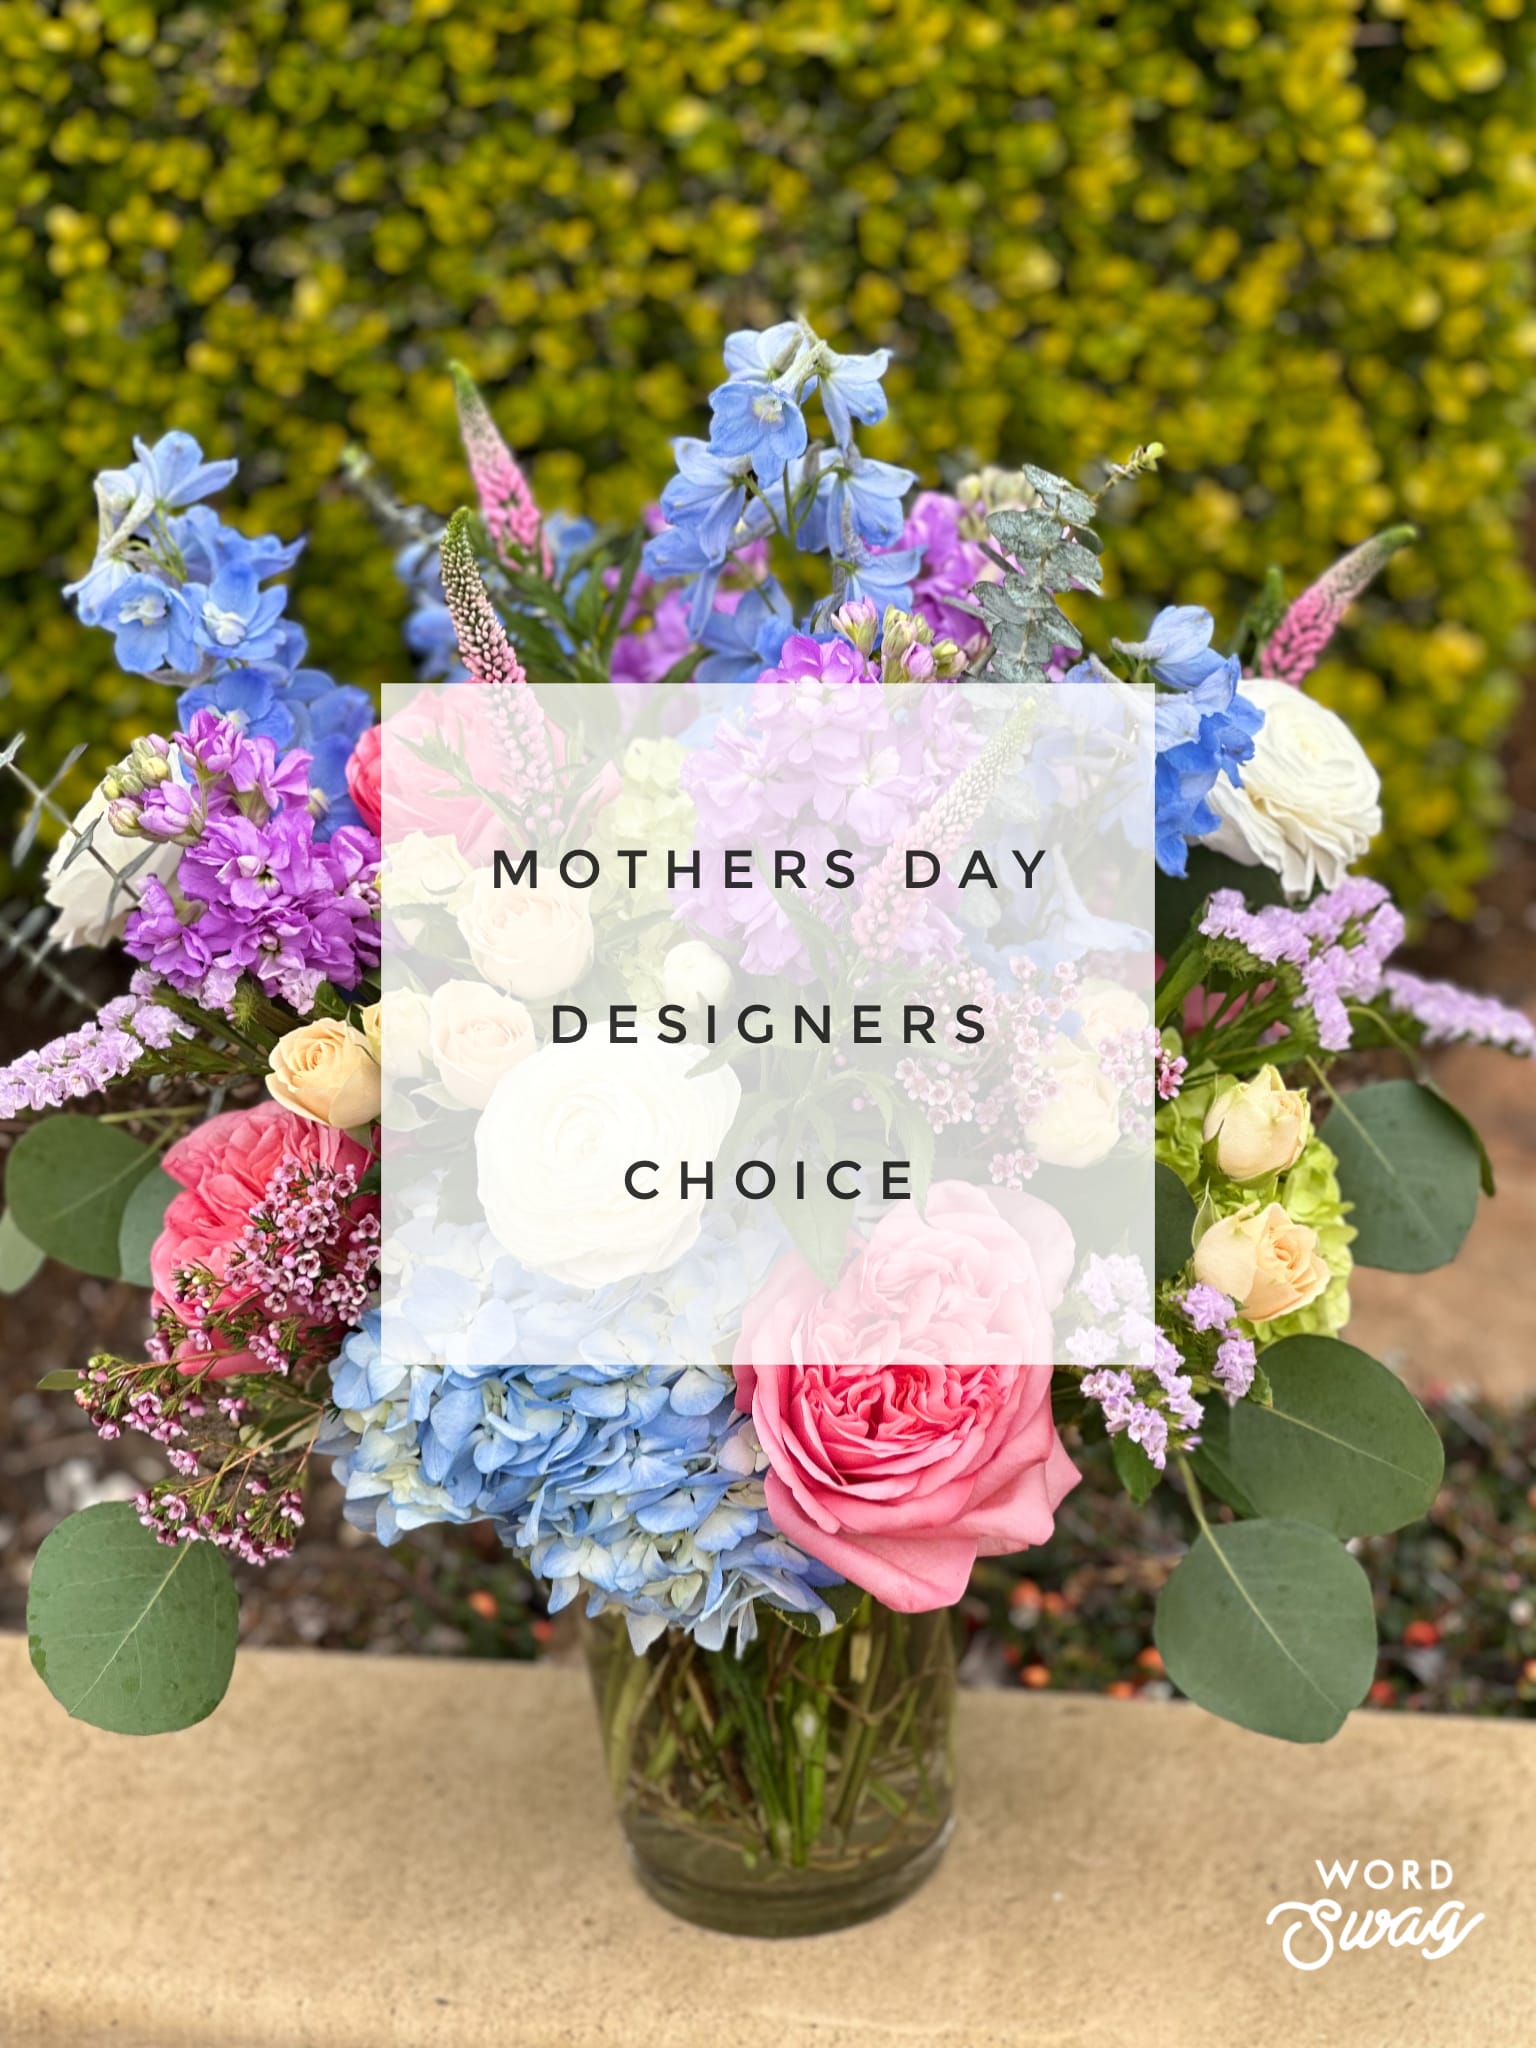 Designers Choice Mothers Day - Let us choose the best from our colors to create a customs design in your favorite color palette